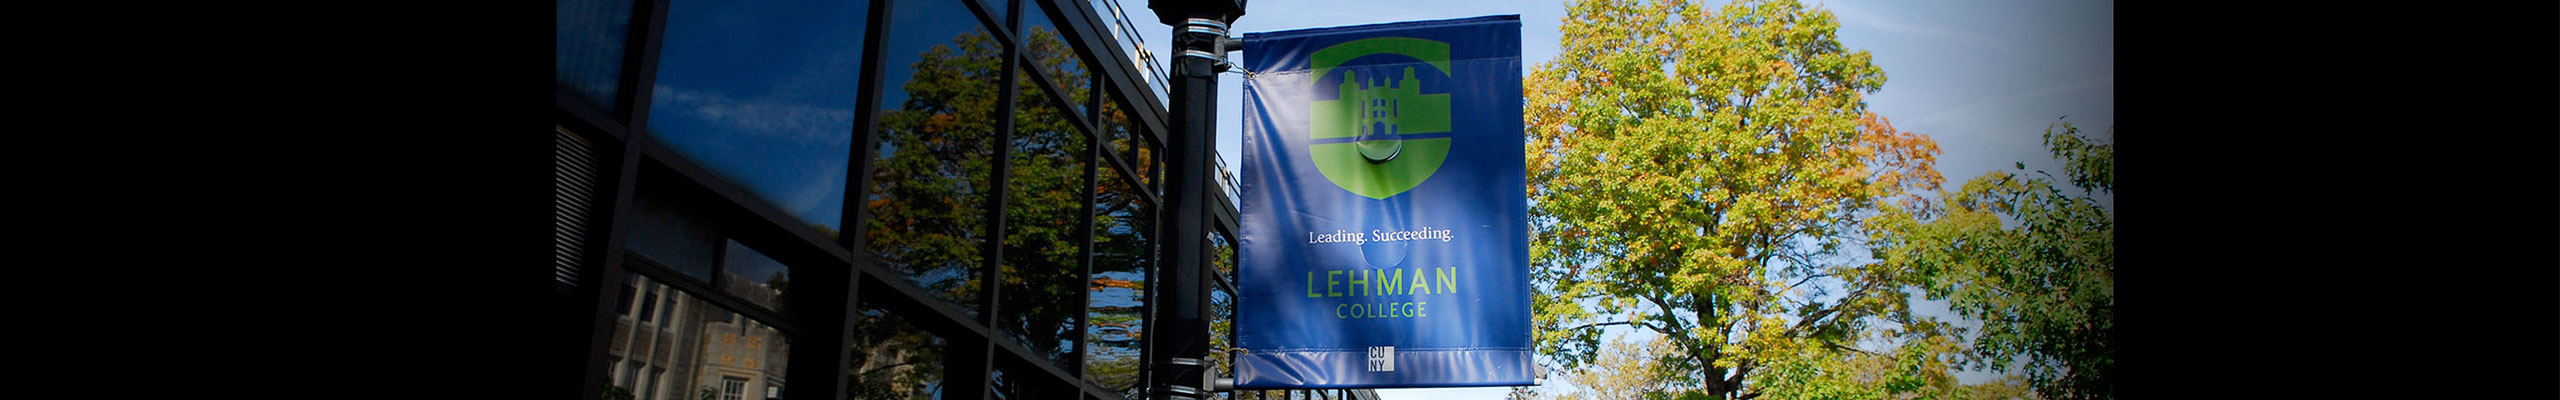 The Division of Student Affairs at Lehman College